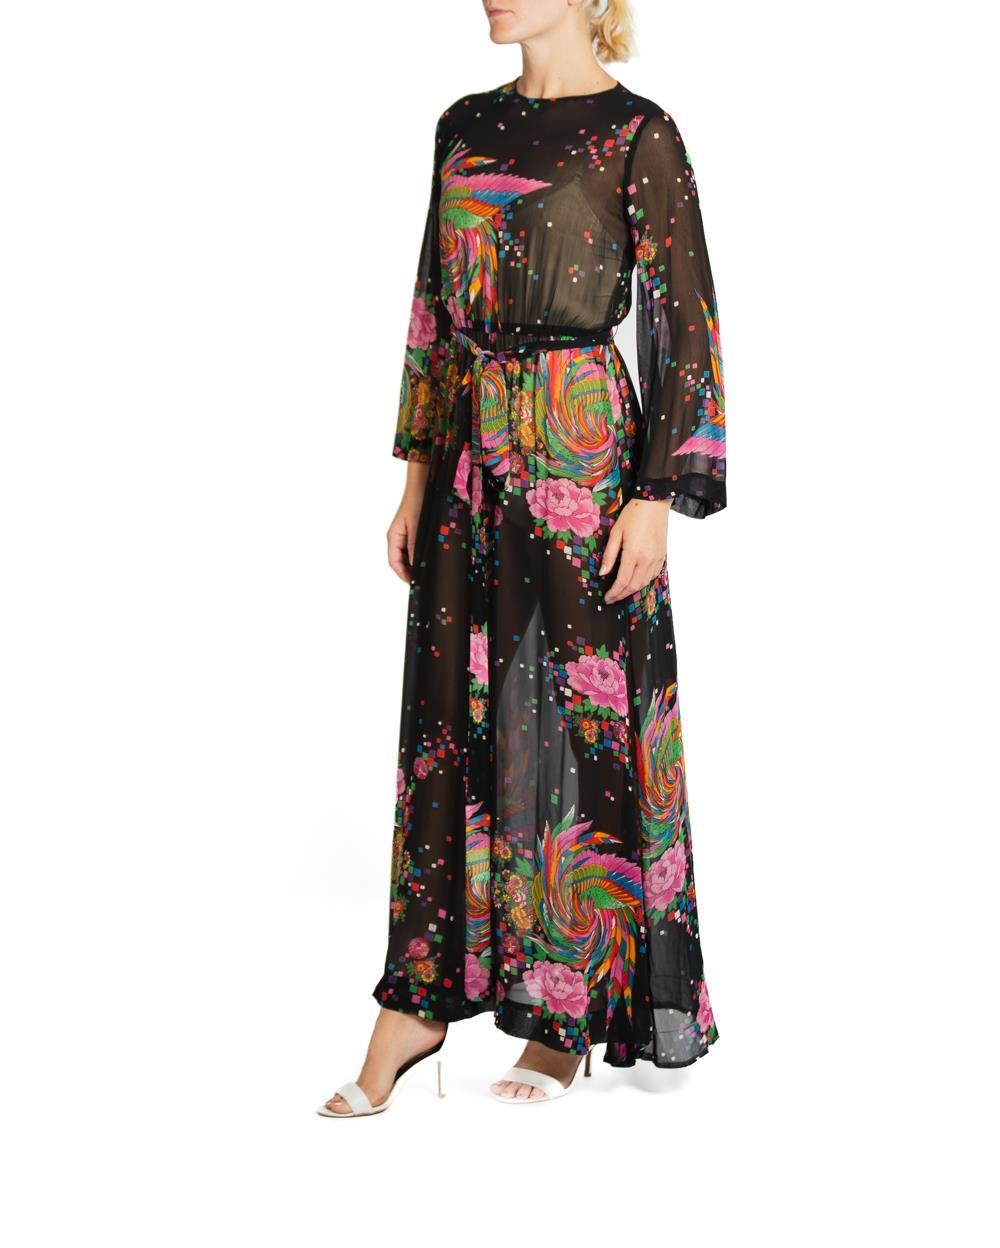 1970S Malcolm Starr Black & Floral Rayon Sheer Dress Made In Italy For Sale 2